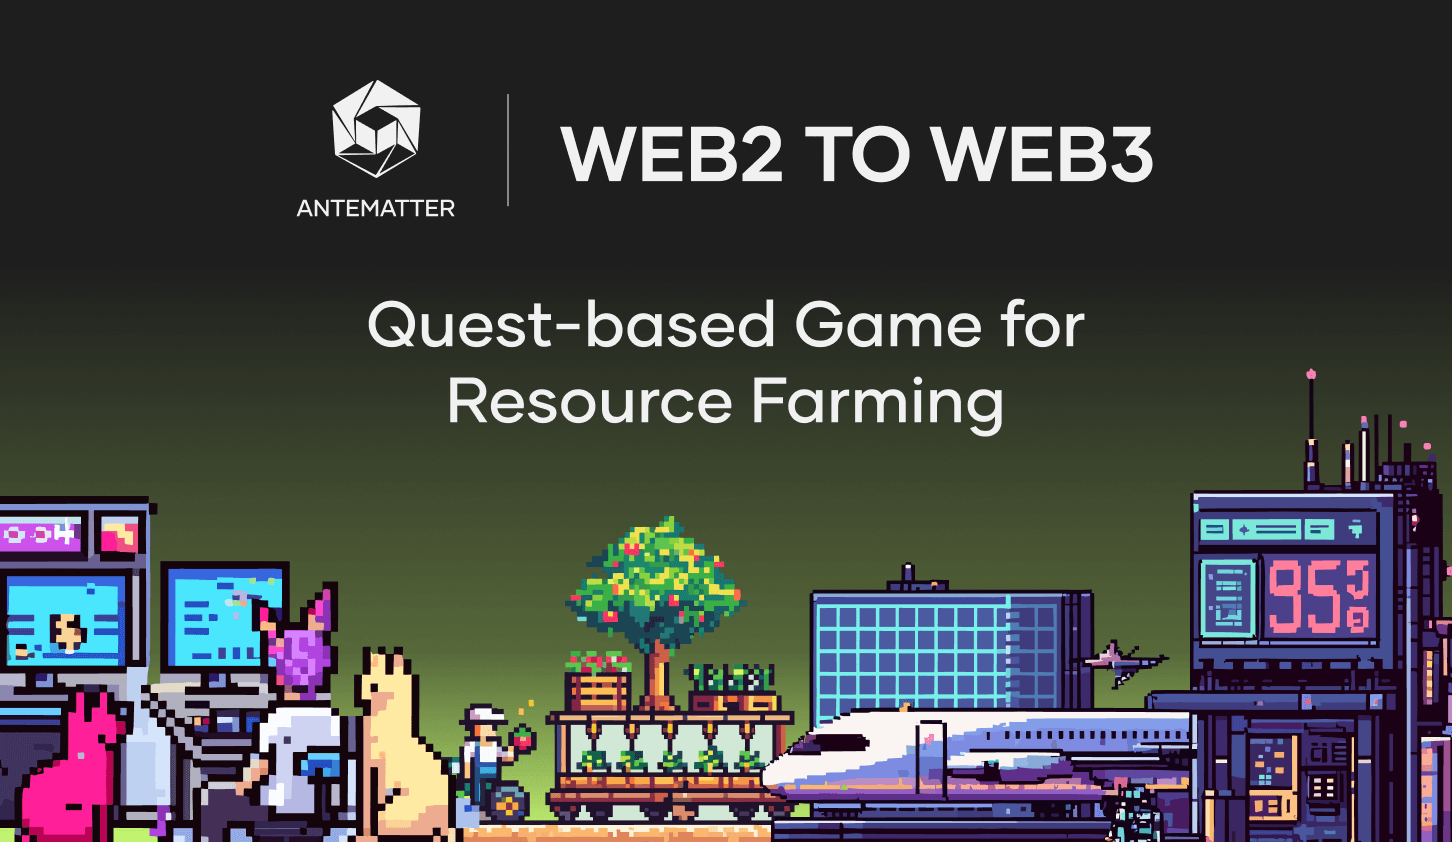 From Web2 to Web3: Quest-based game for resource farming